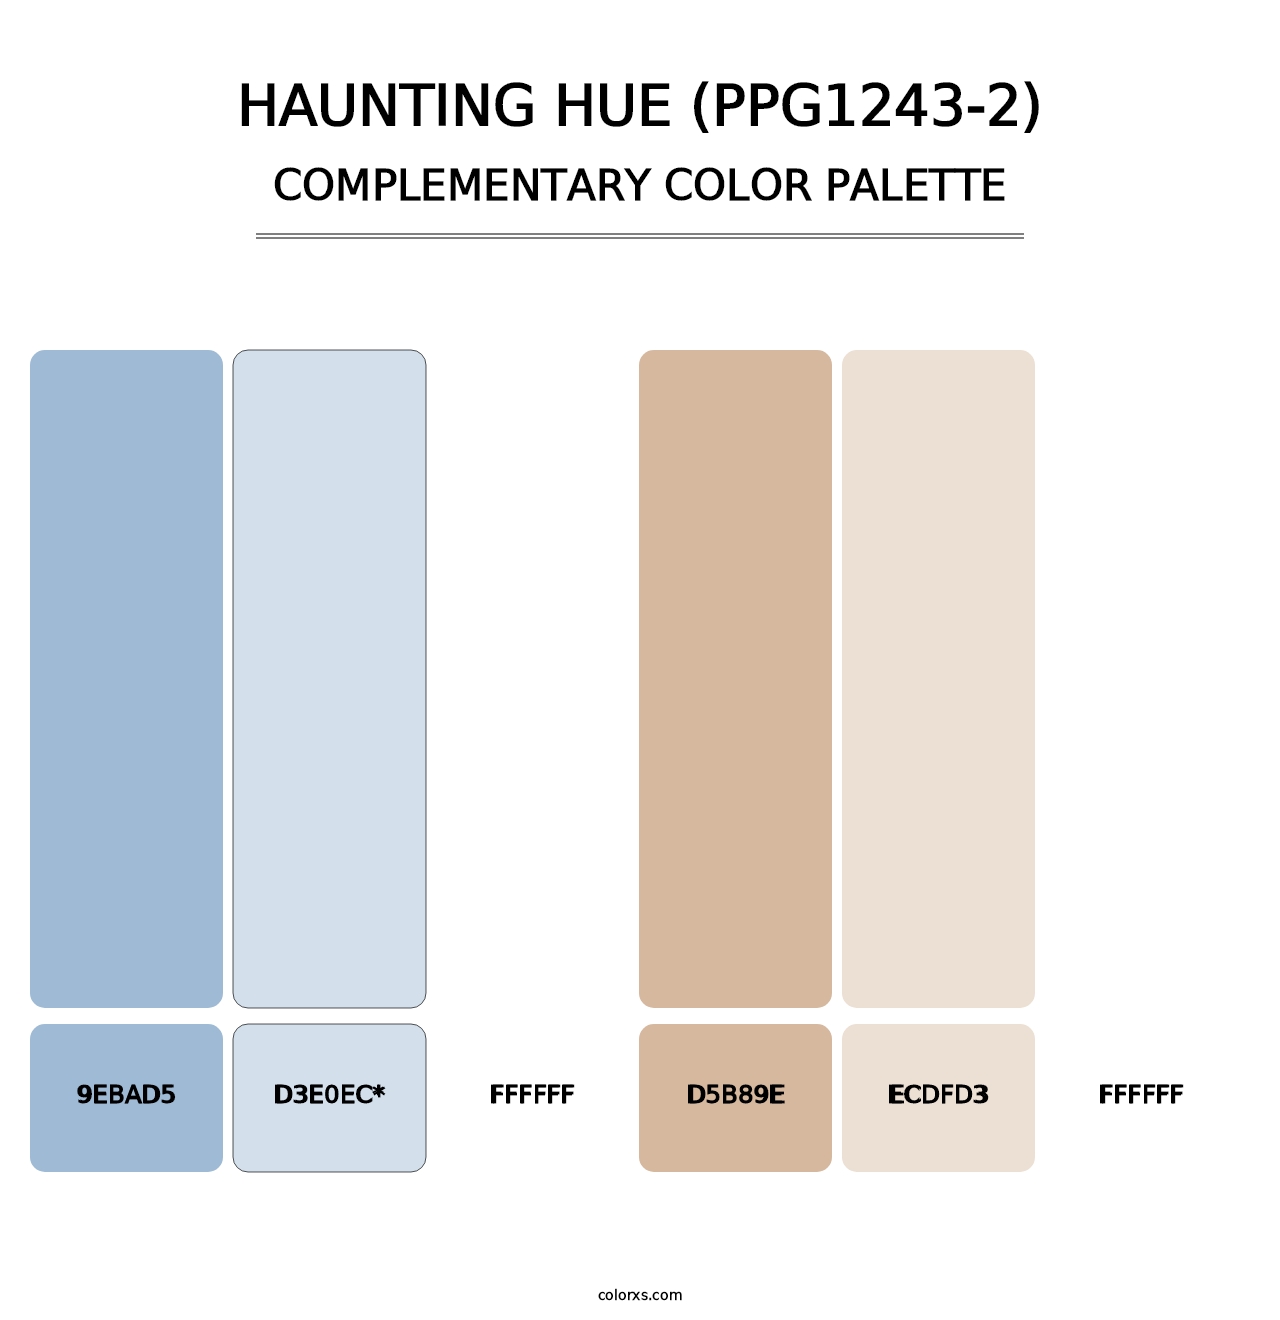 Haunting Hue (PPG1243-2) - Complementary Color Palette